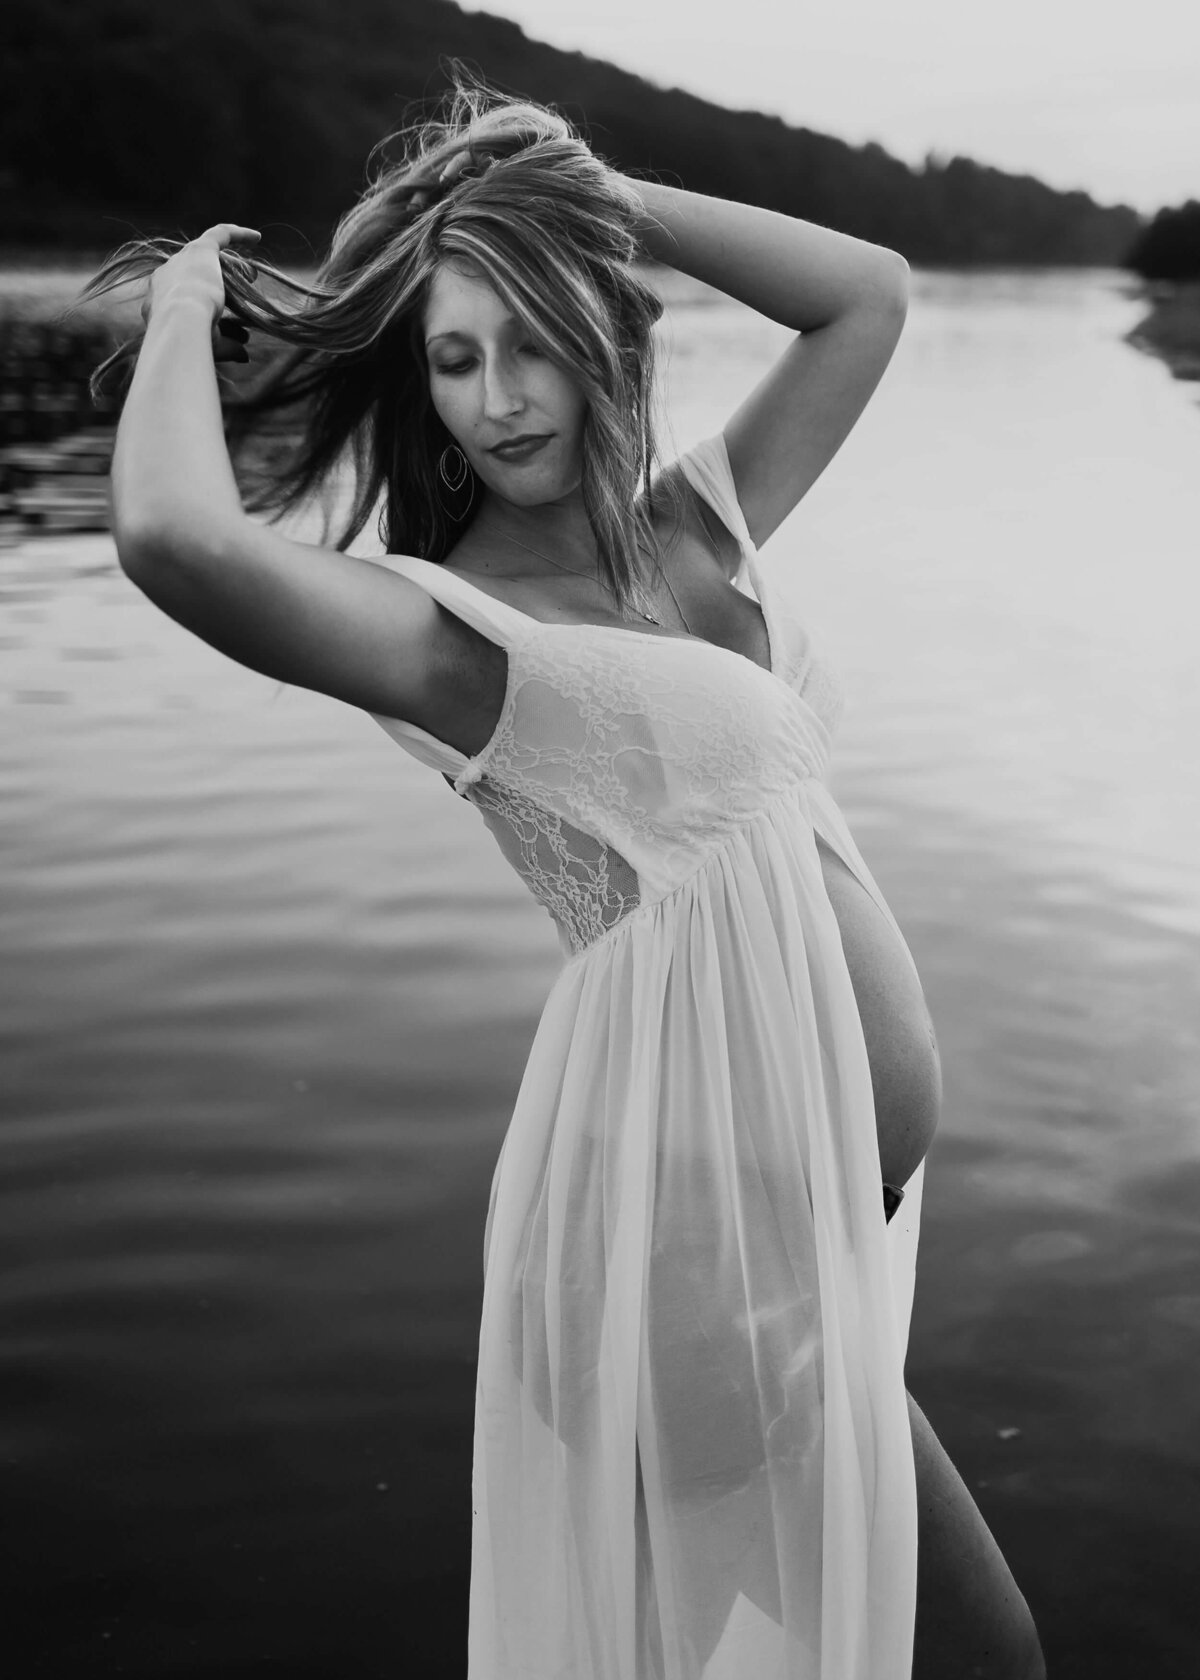 A pregnant woman in a white dress posed by the water, captured beautifully by a Pittsburgh maternity photographer.